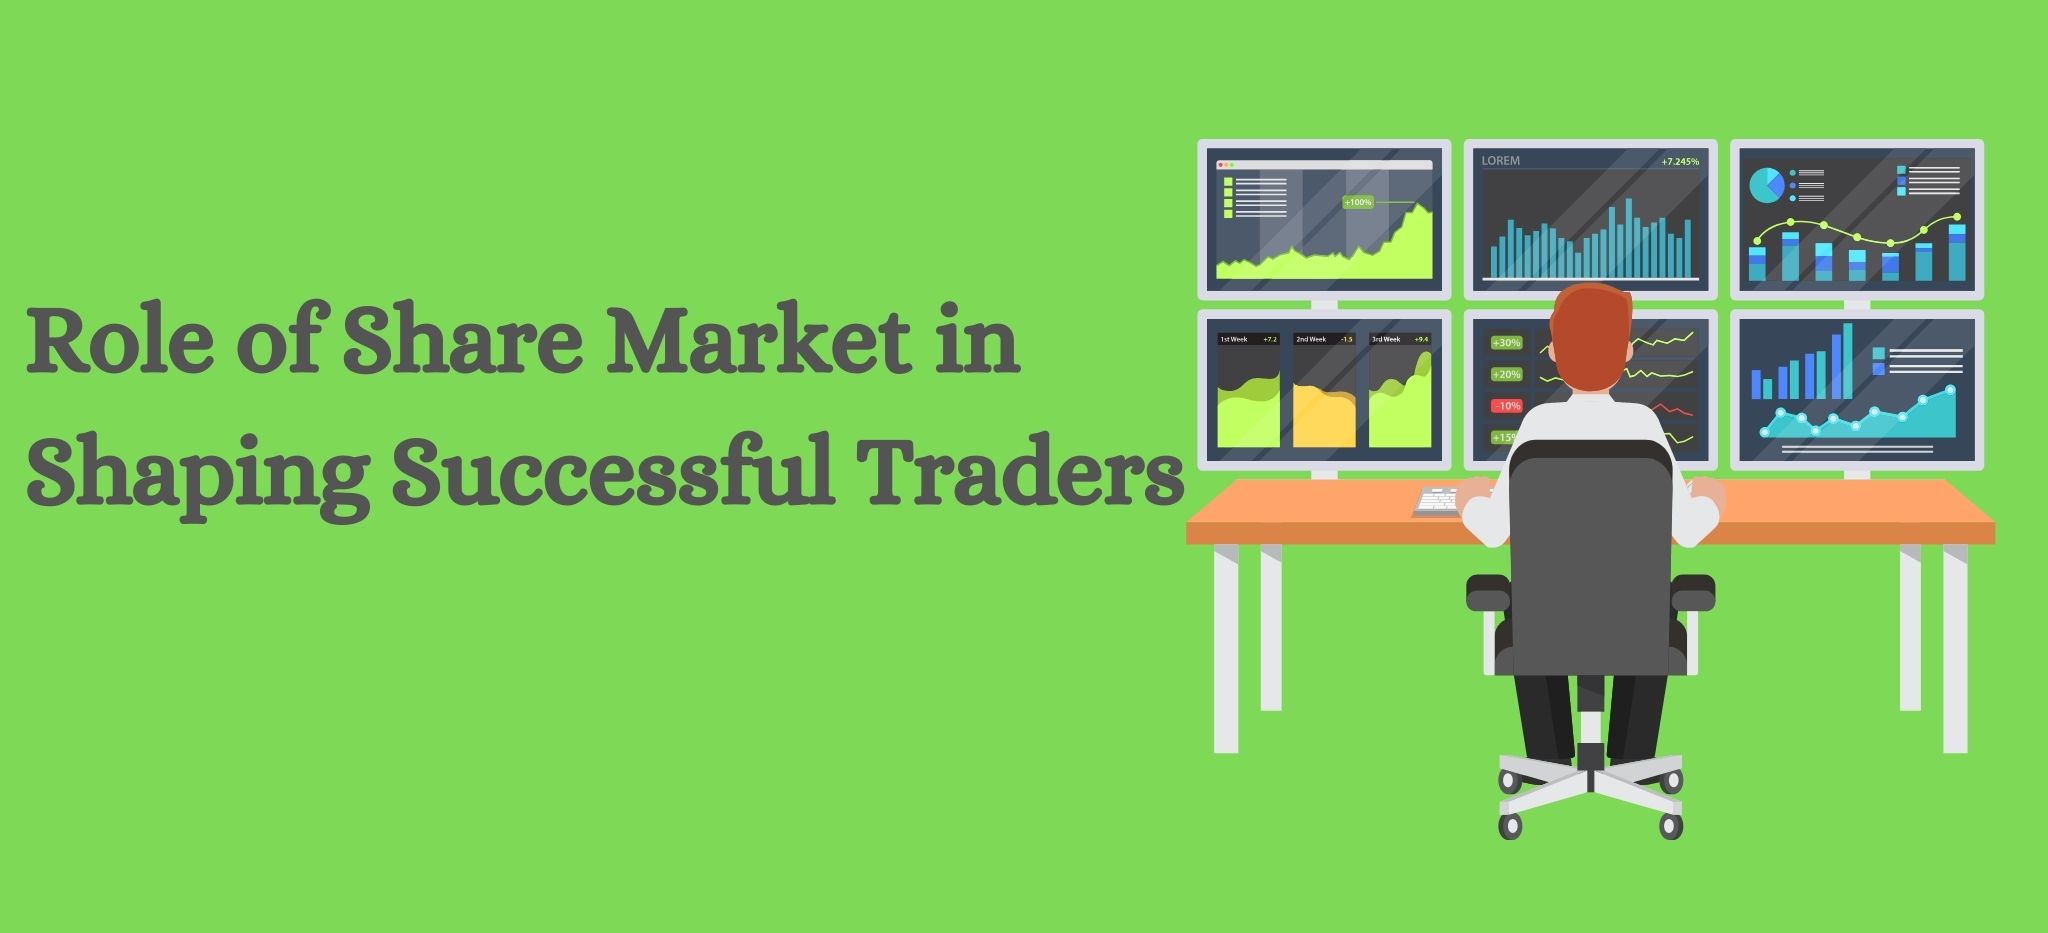 Shaping Successful Traders